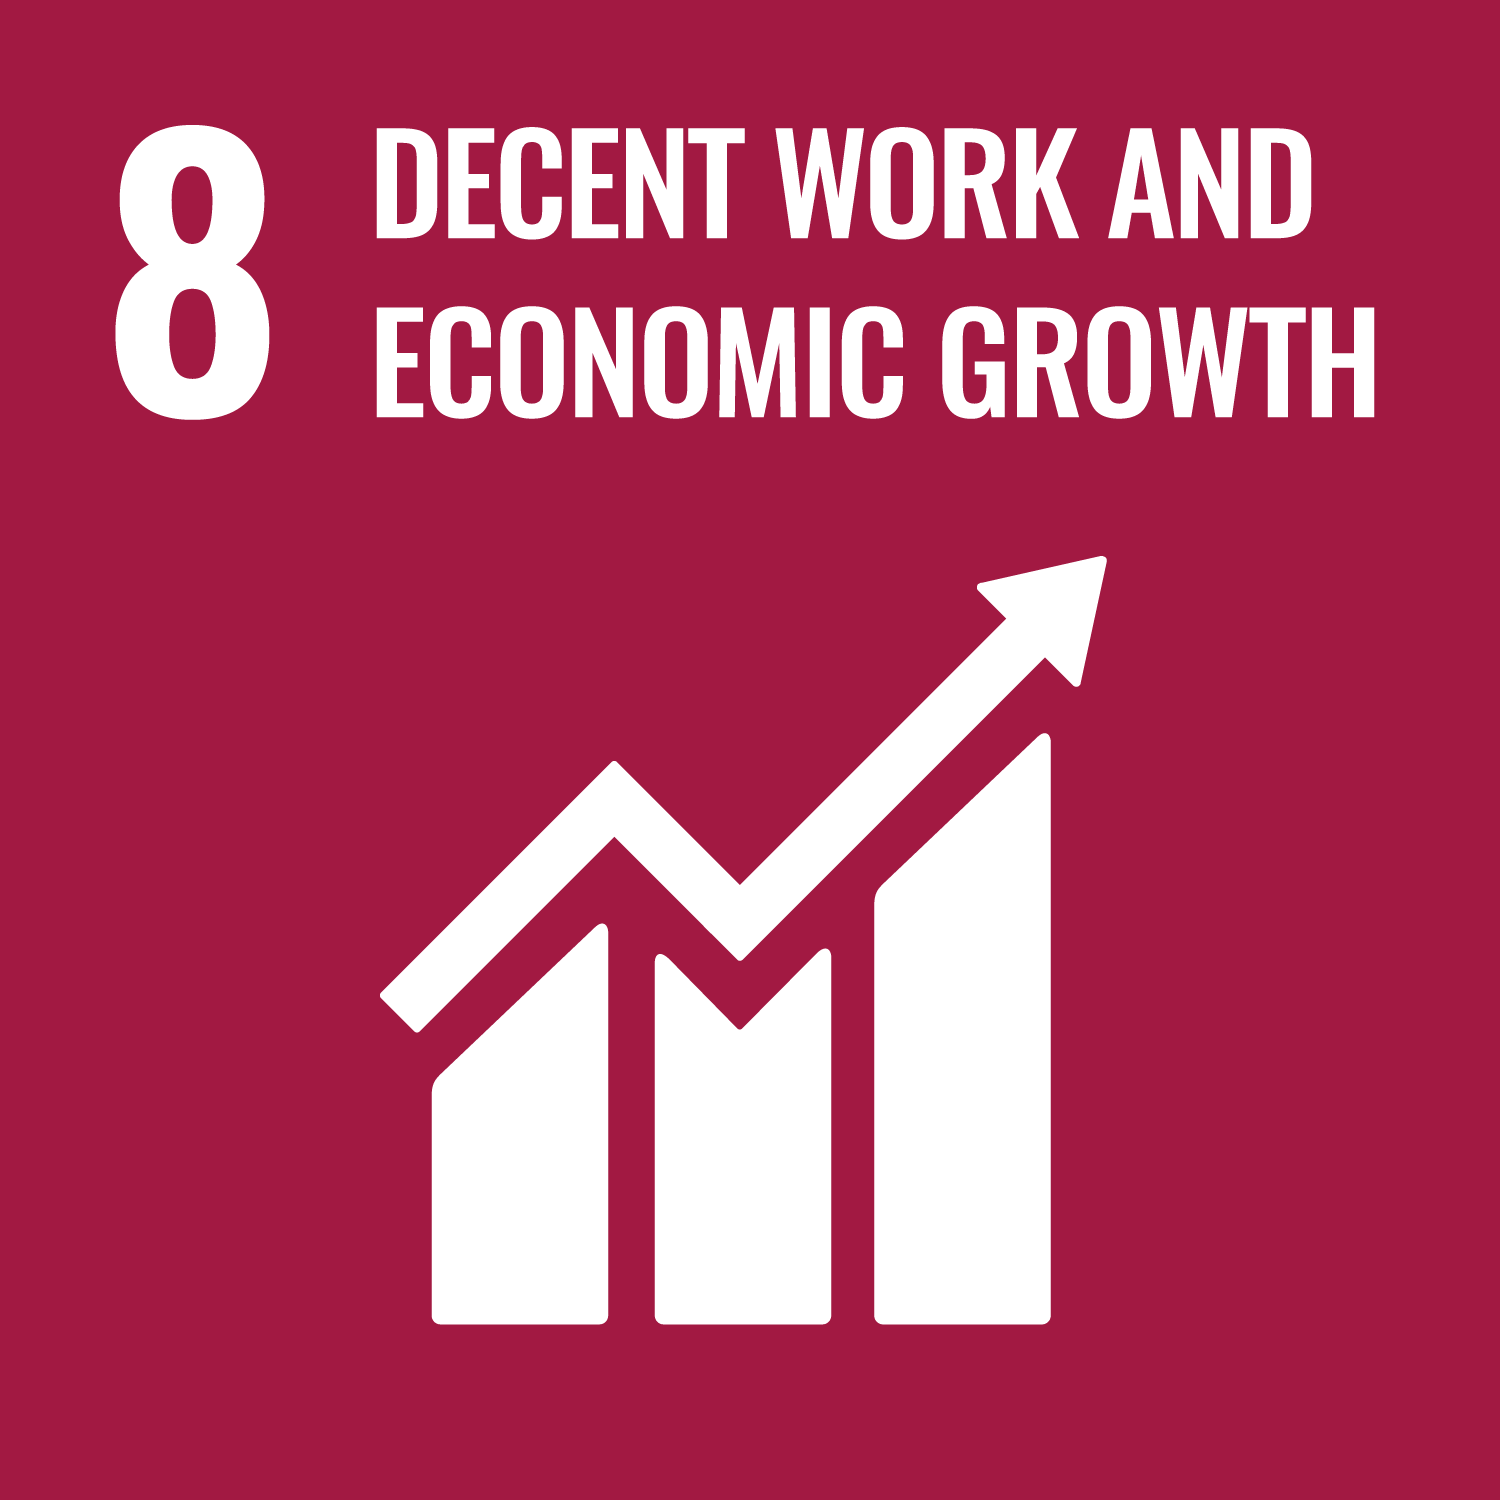 ８. DECENT WORK AND ECONOMIC GROWTH